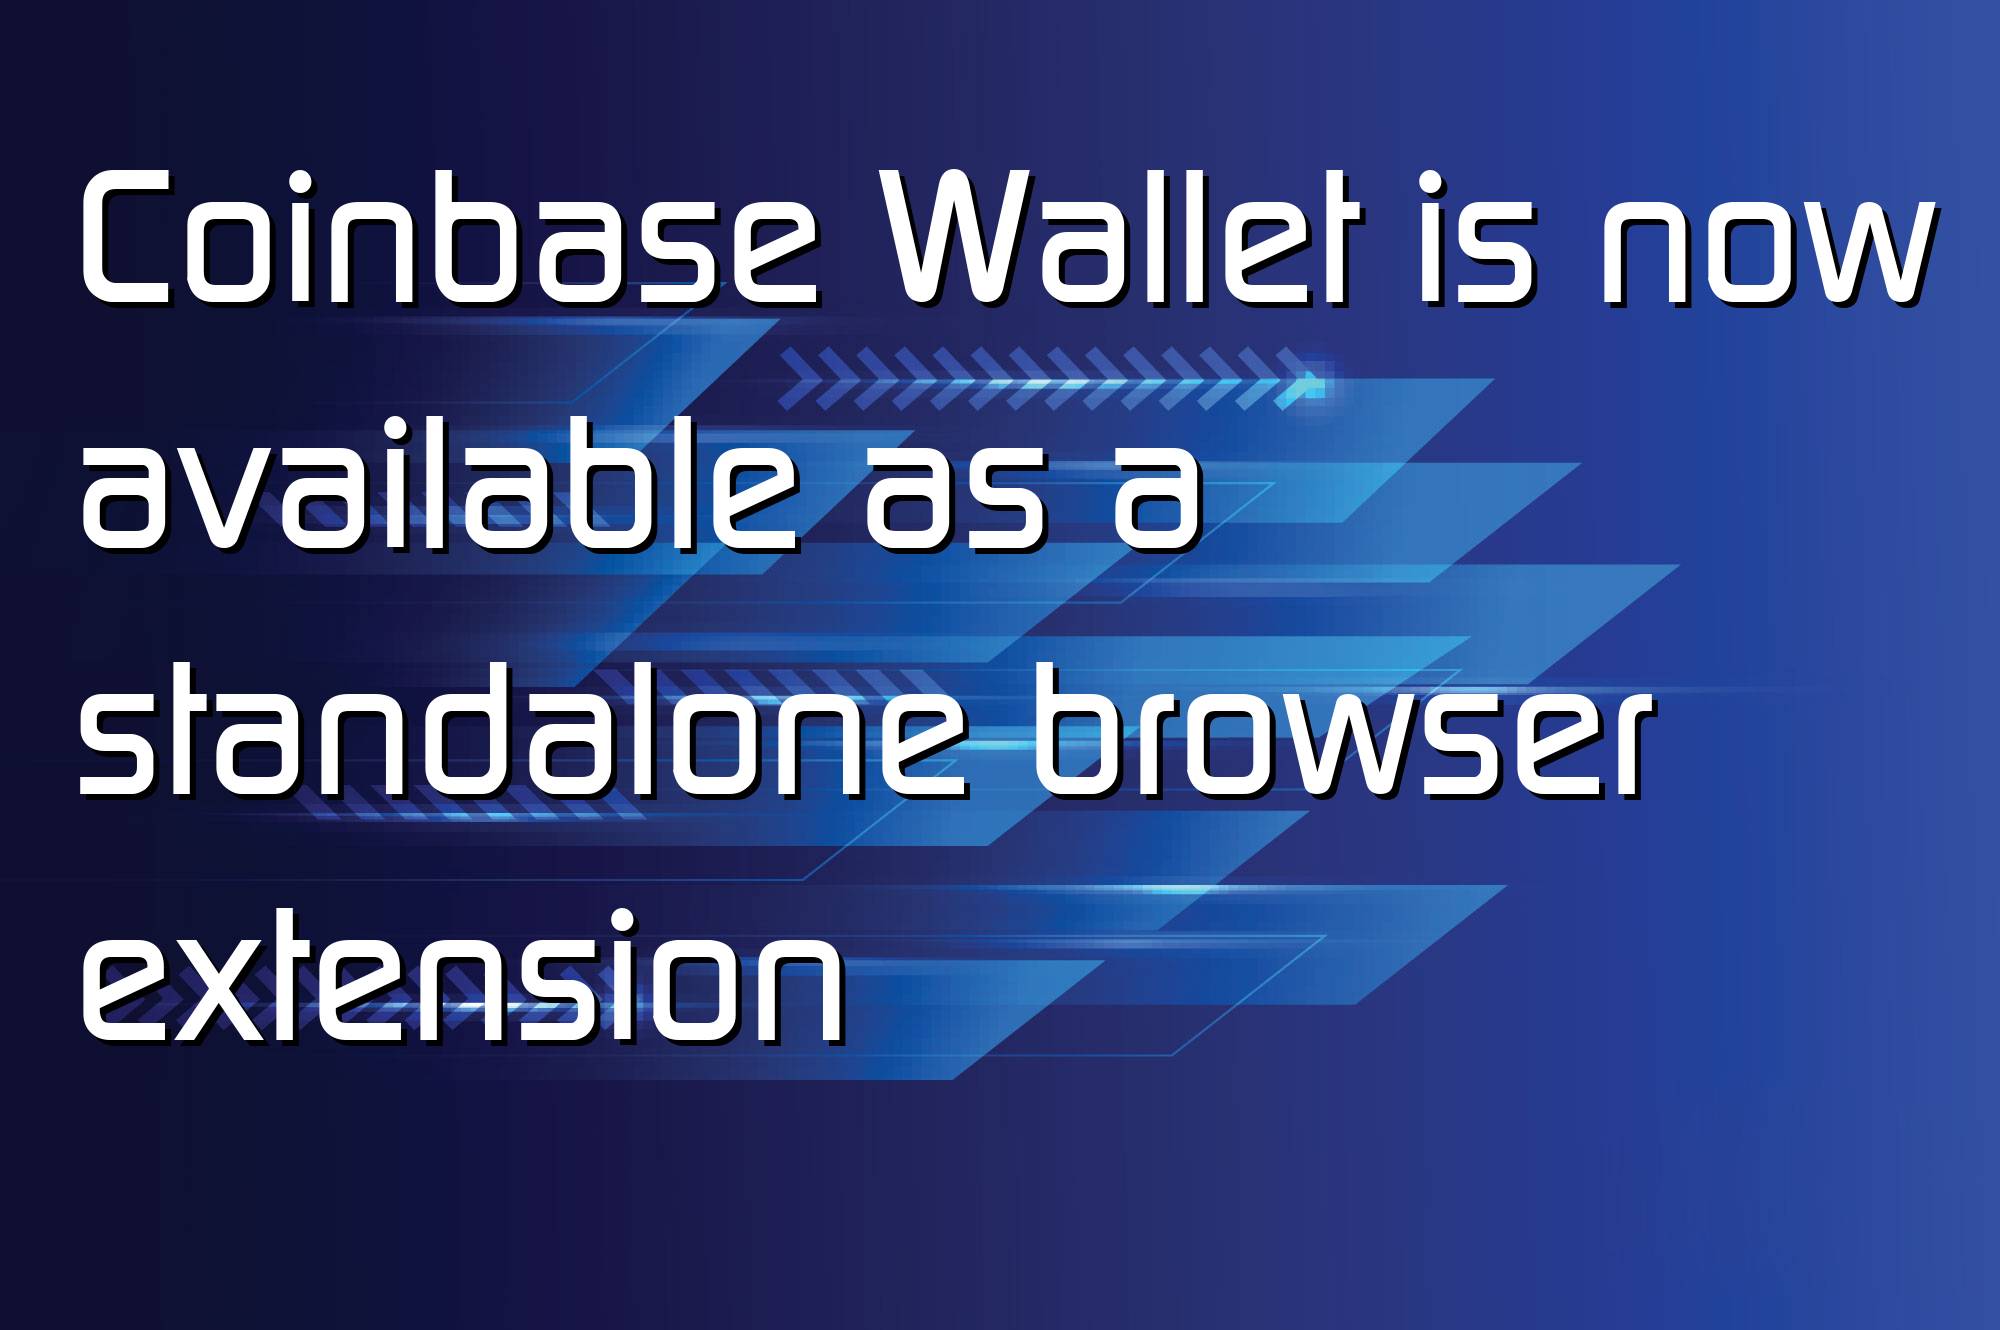 @$66143: Coinbase Wallet is now available as a standalone browser extension